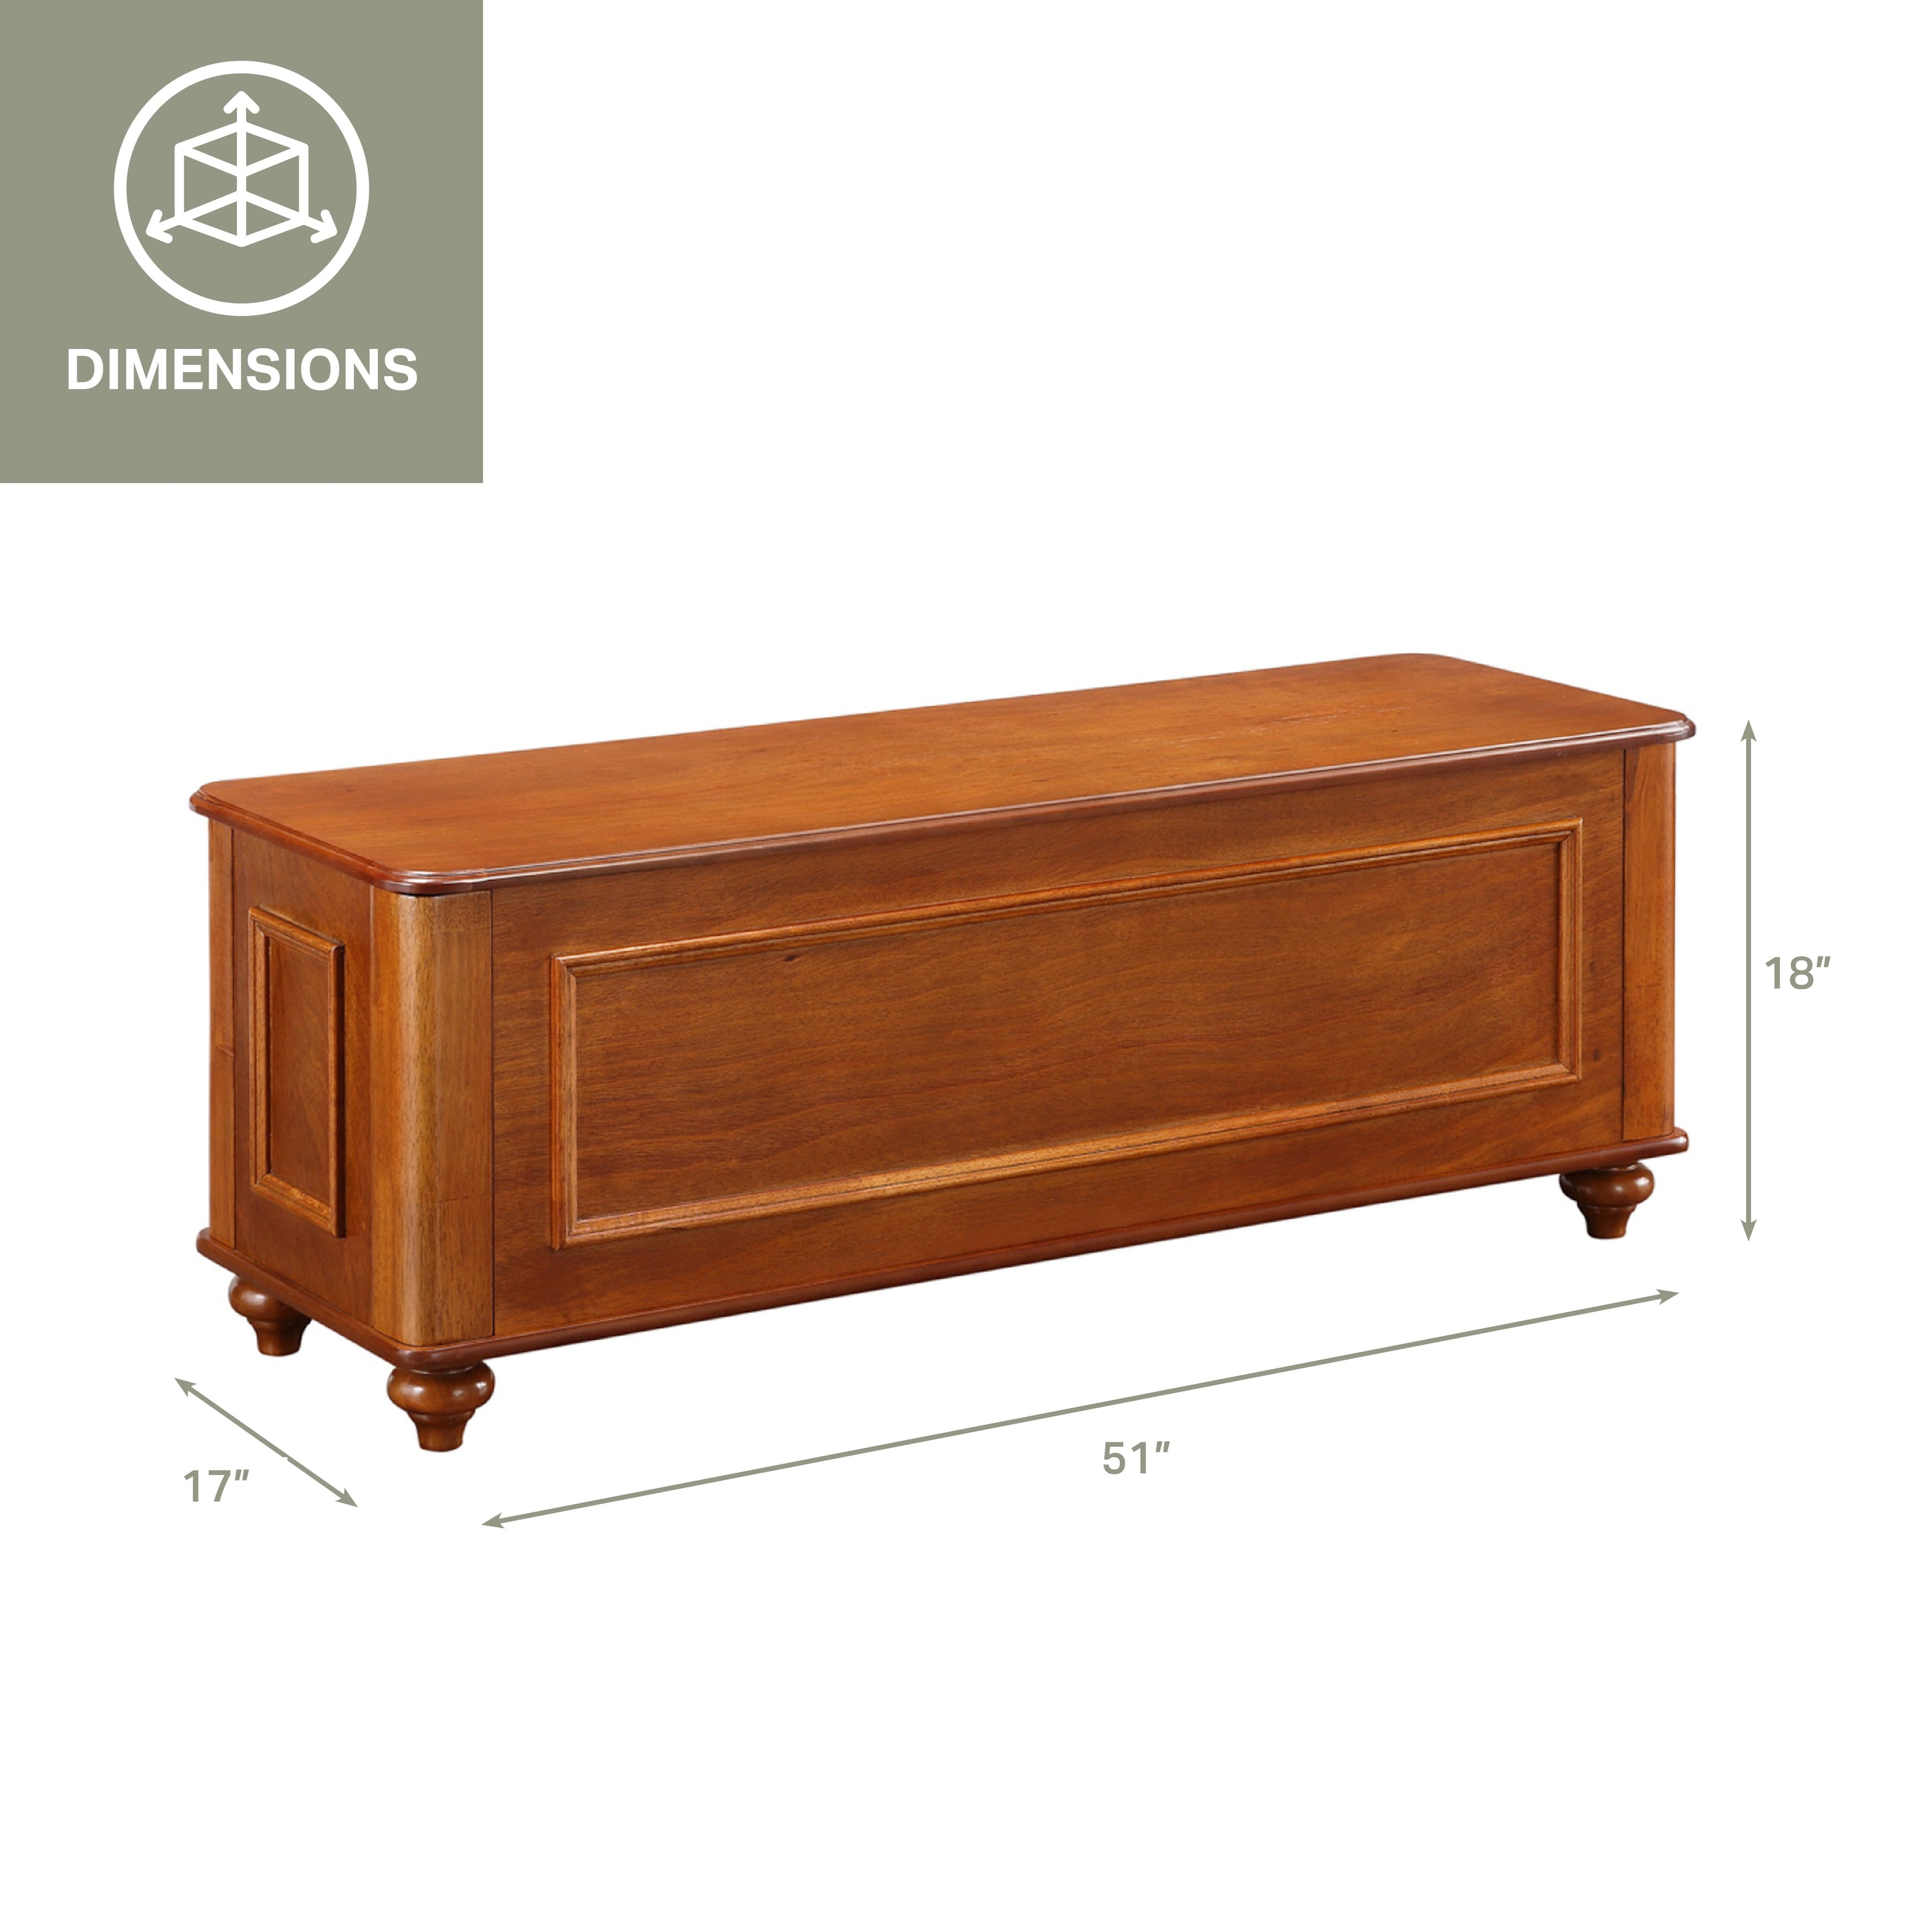 Hope Chest with Gun Concealment - Bed Bath & Beyond - 10112694